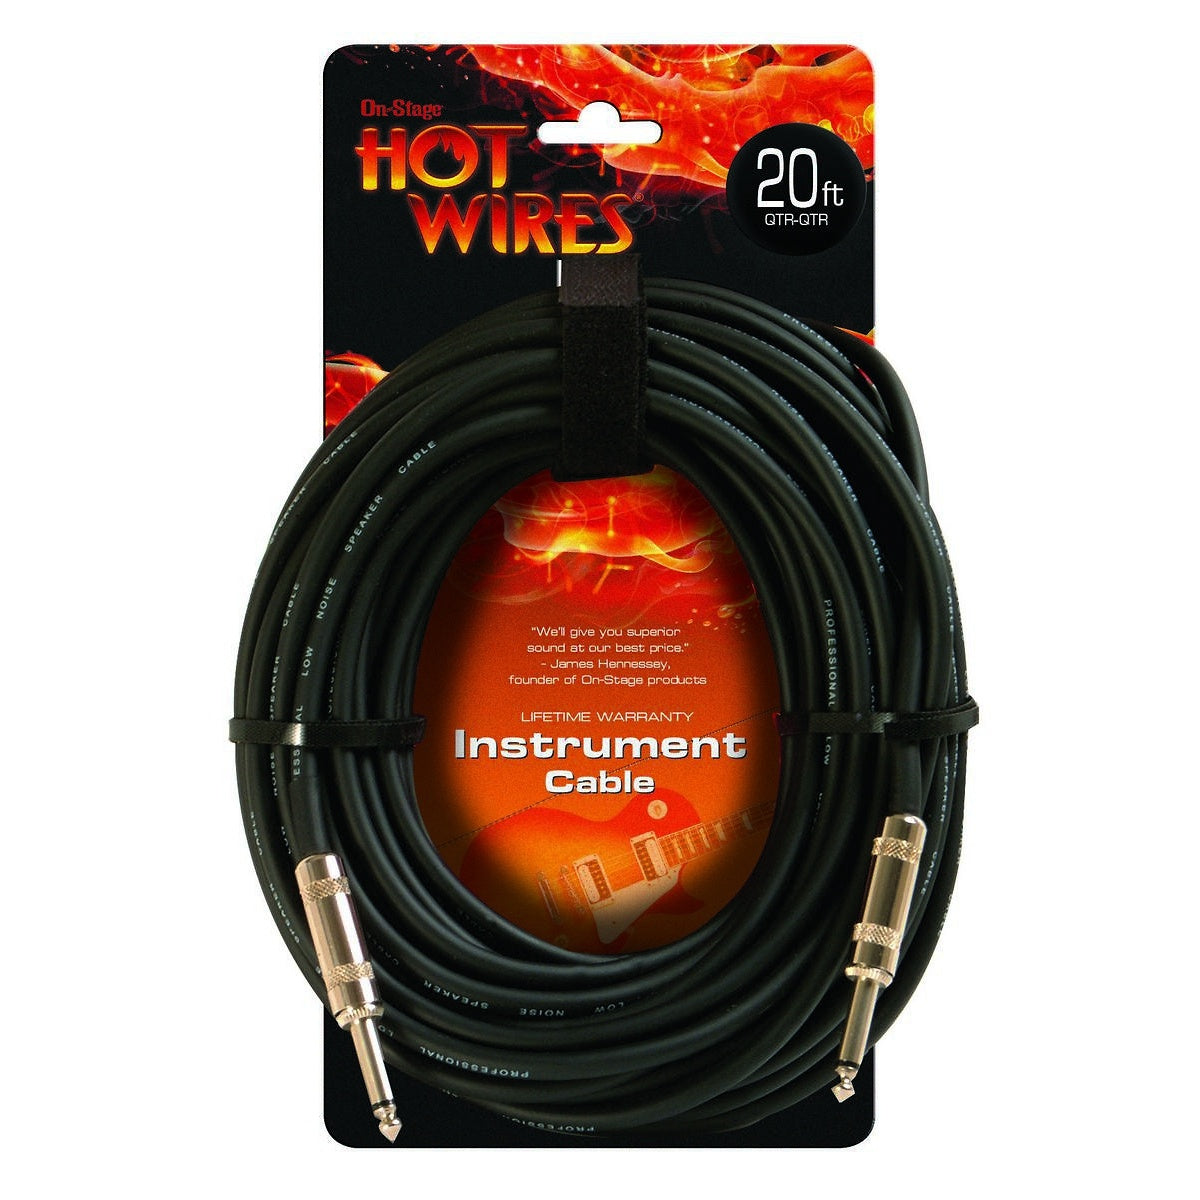 Hot Wires Guitar Instrument Cable, 20 Foot